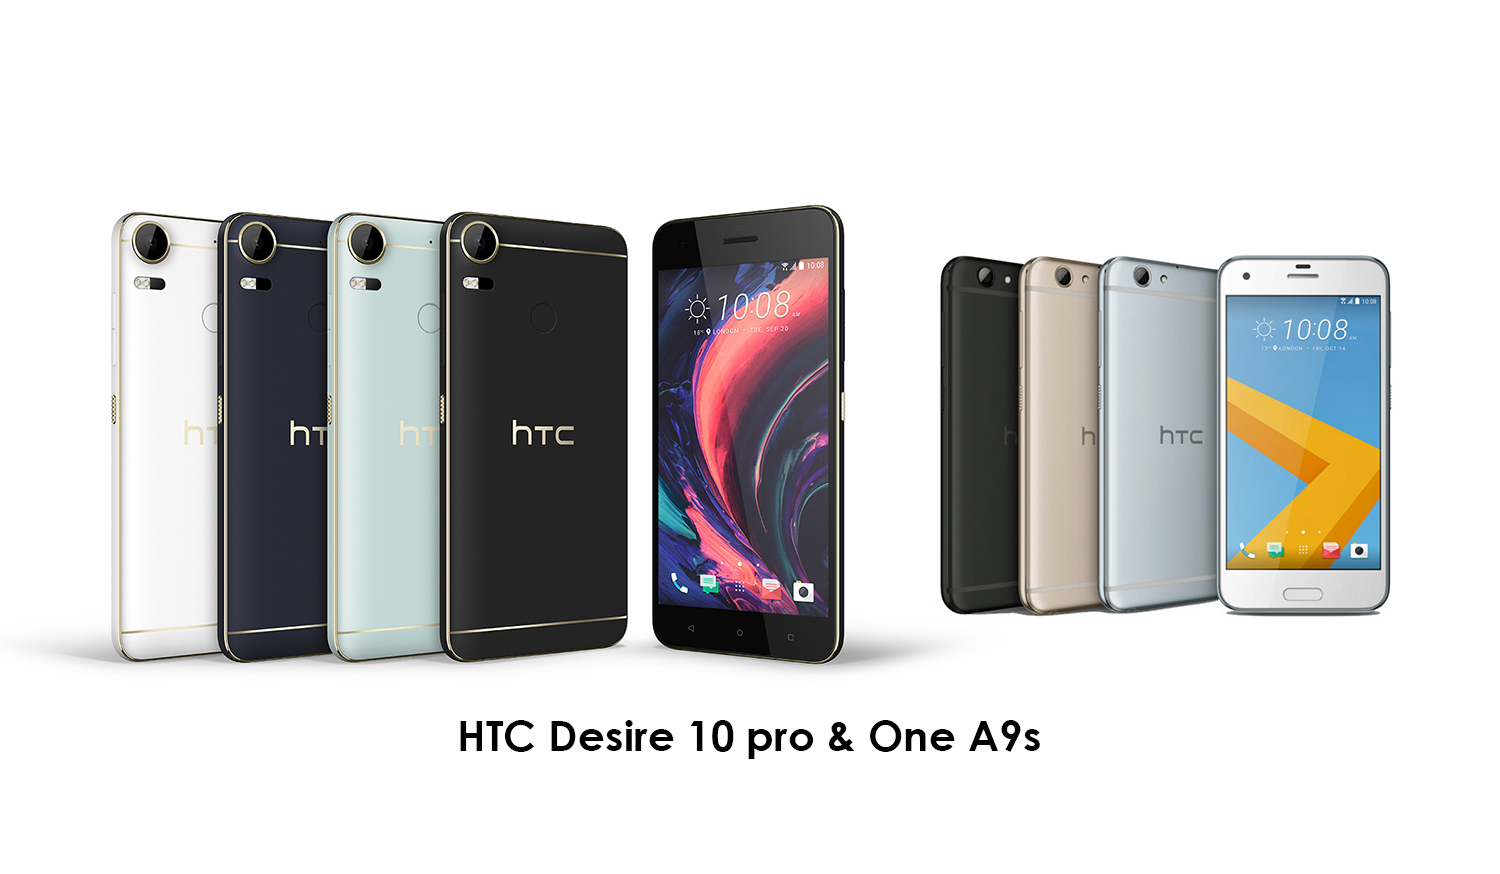 HTC Desire 10 pro and One A9s Will Be Available in Malaysia on 26th December